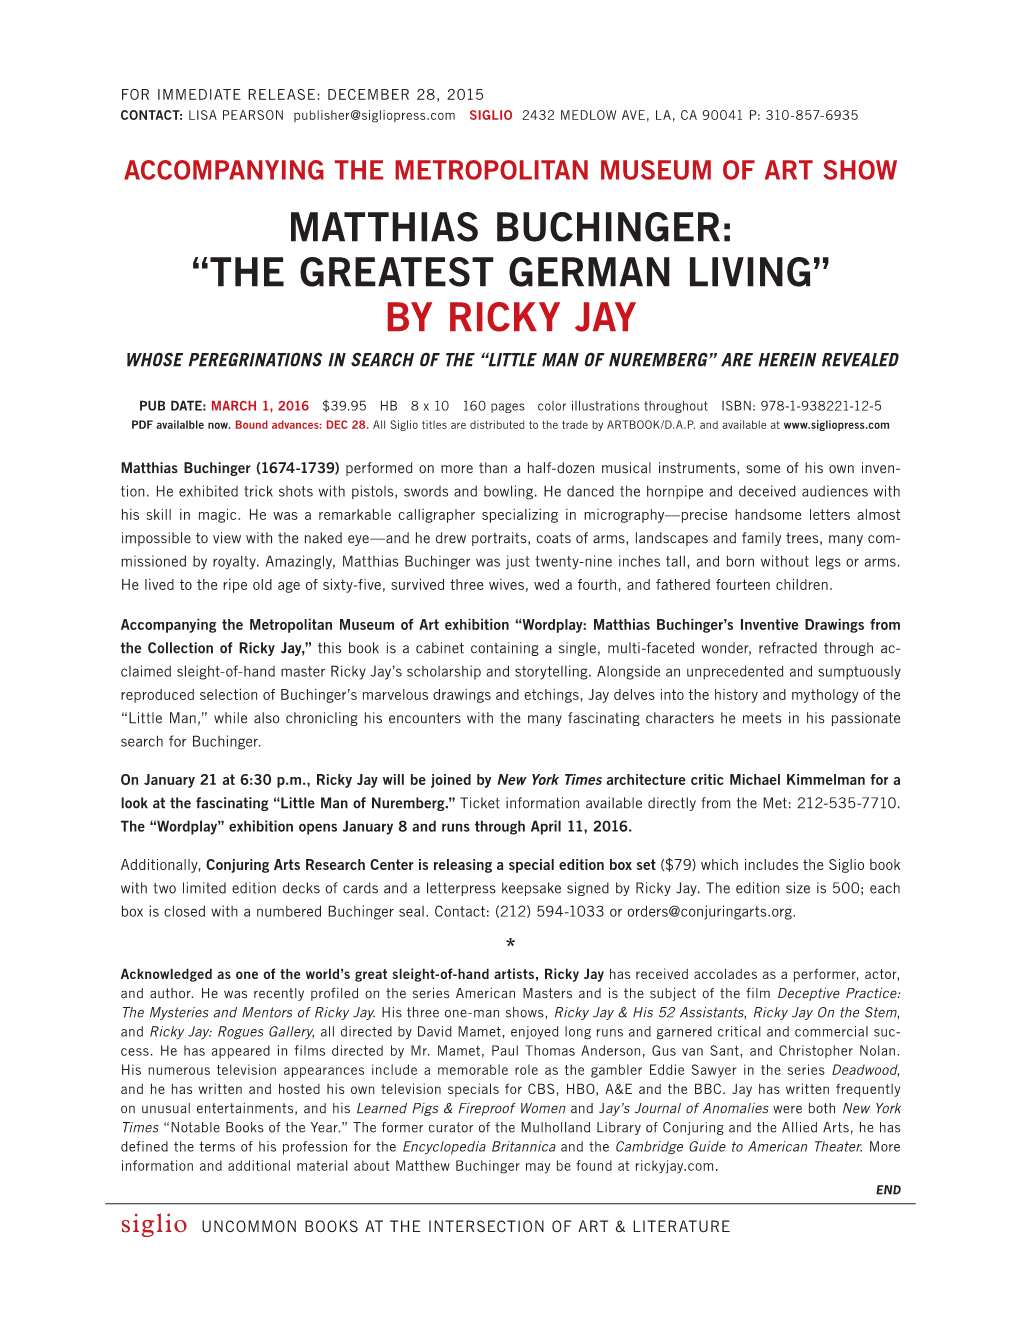 Matthias Buchinger: “The Greatest German Living” by Ricky Jay Whose Peregrinations in Search of the “Little Man of Nuremberg” Are Herein Revealed